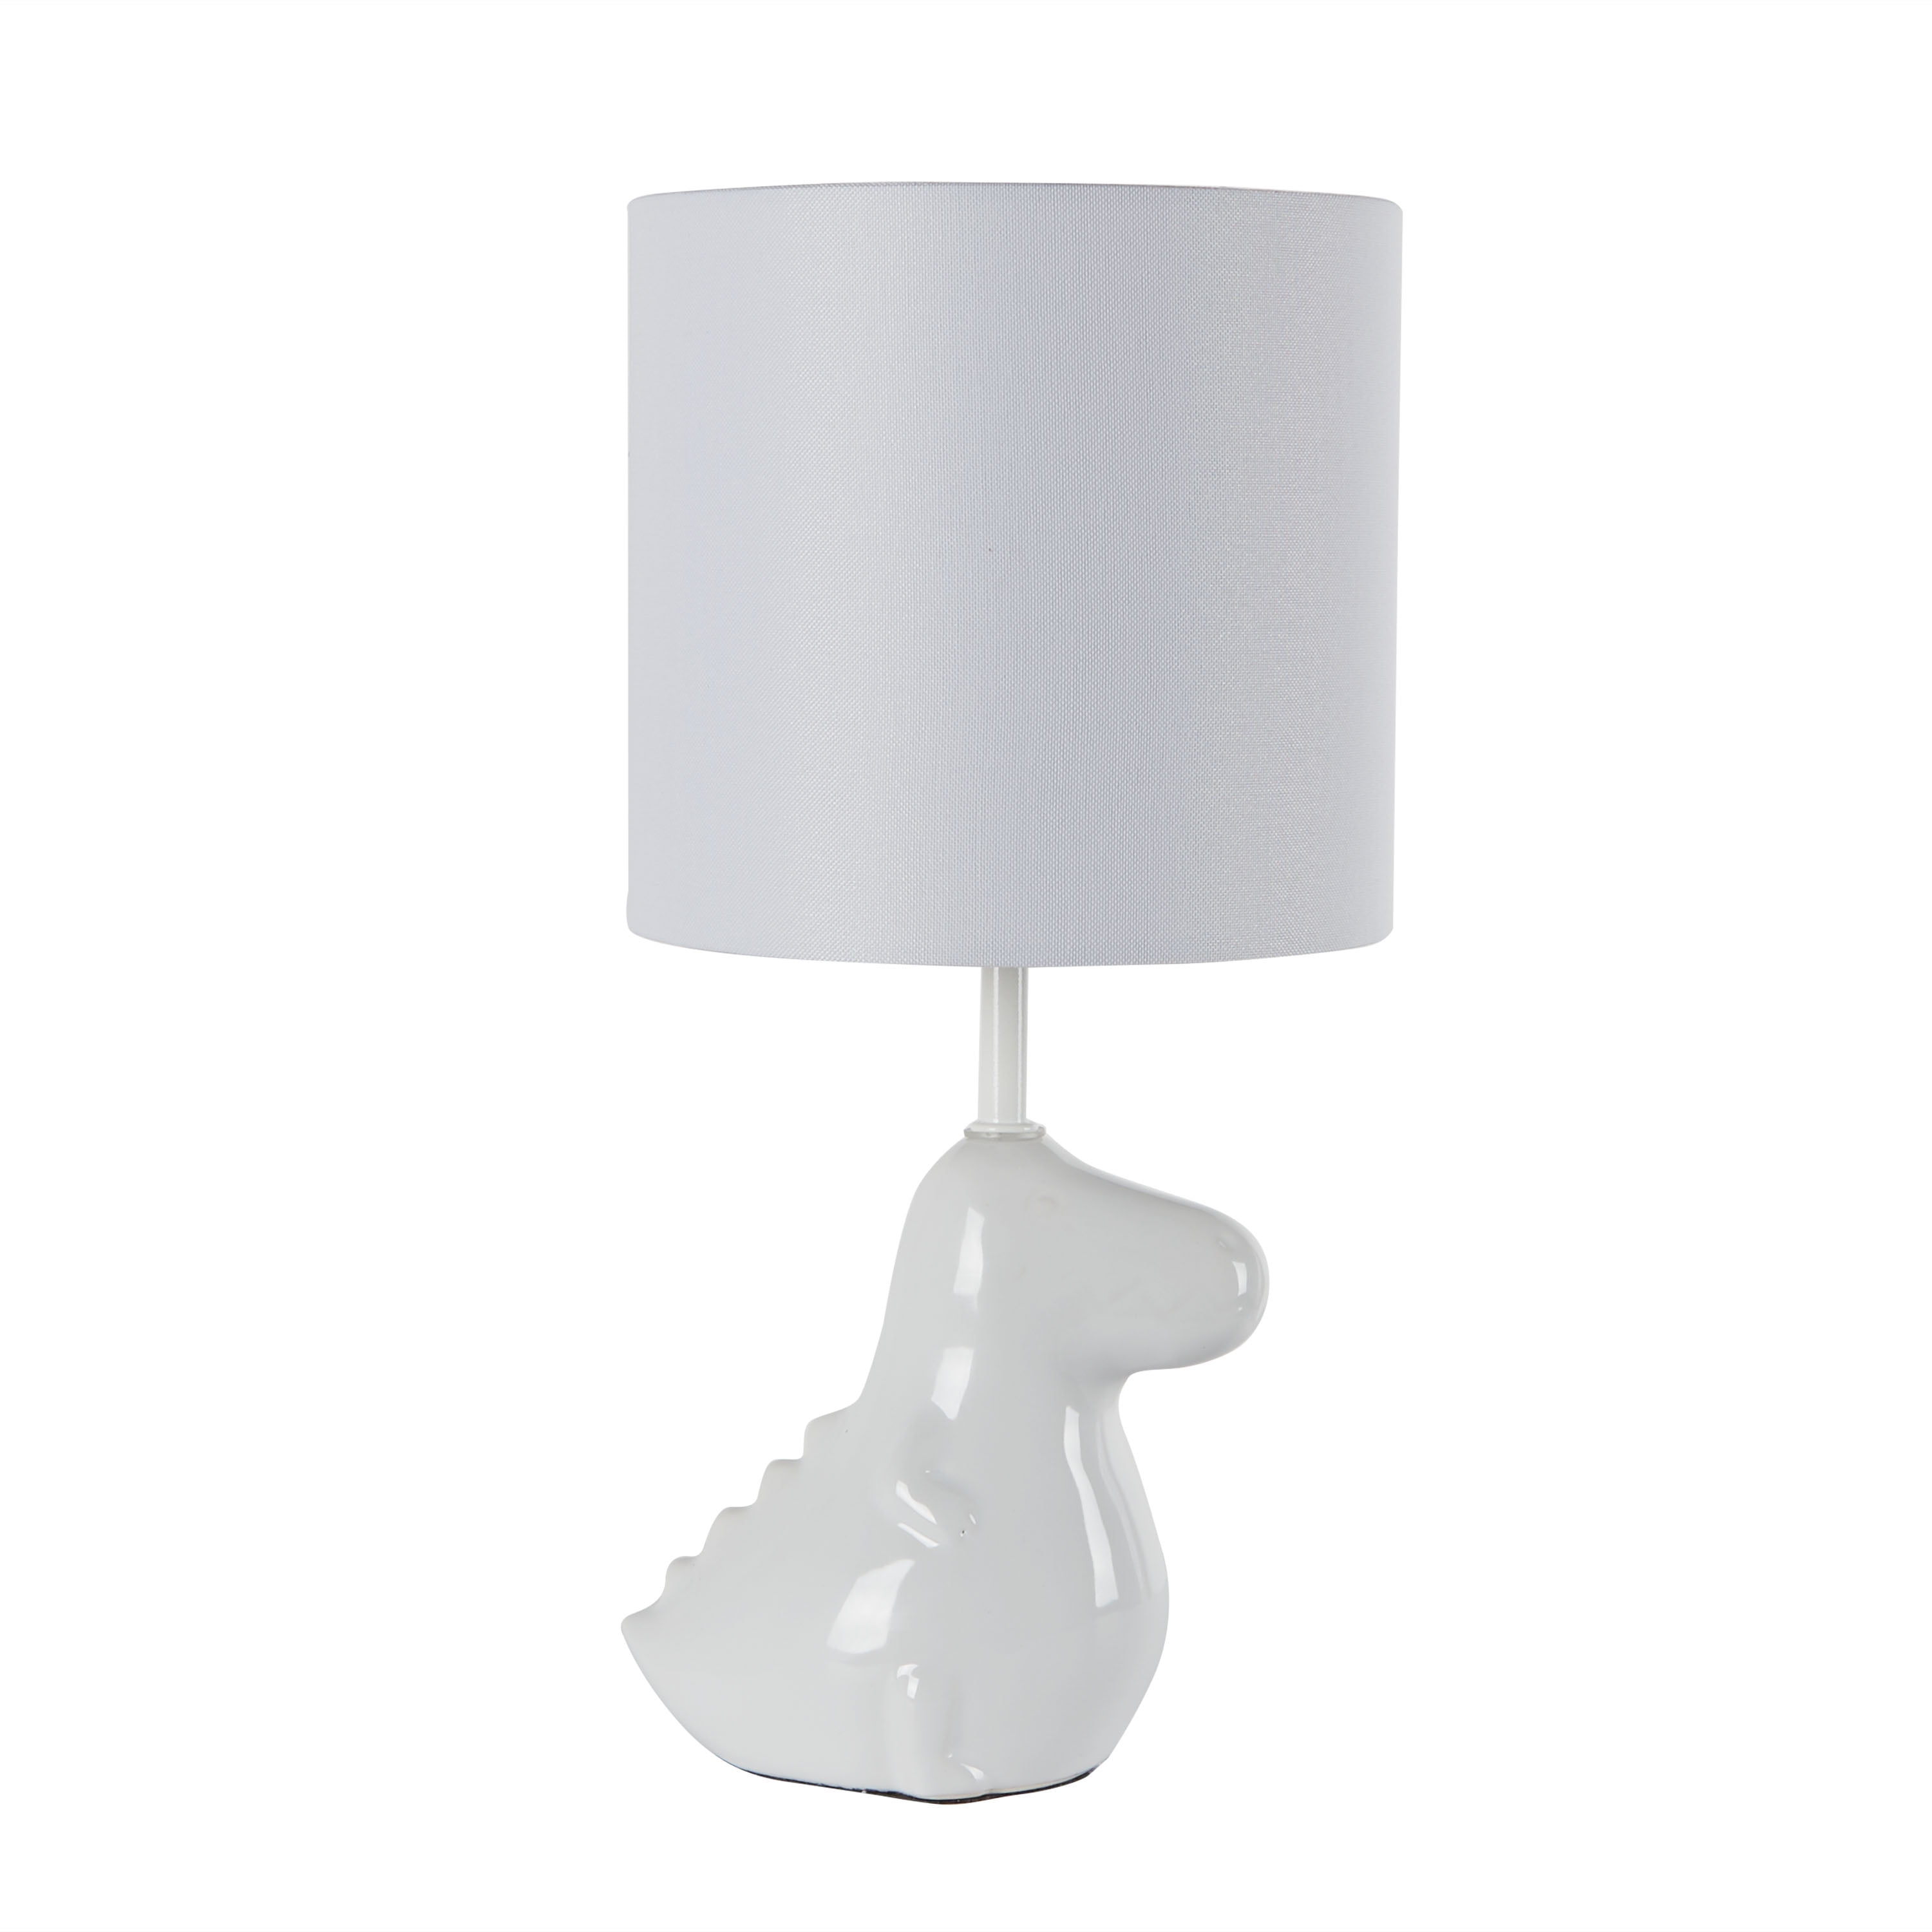 Your Zone Dinosaur Ceramic Table Lamp with LED Bulb (White) $9.06 + Free S&H w/ Walmart+ or $35+